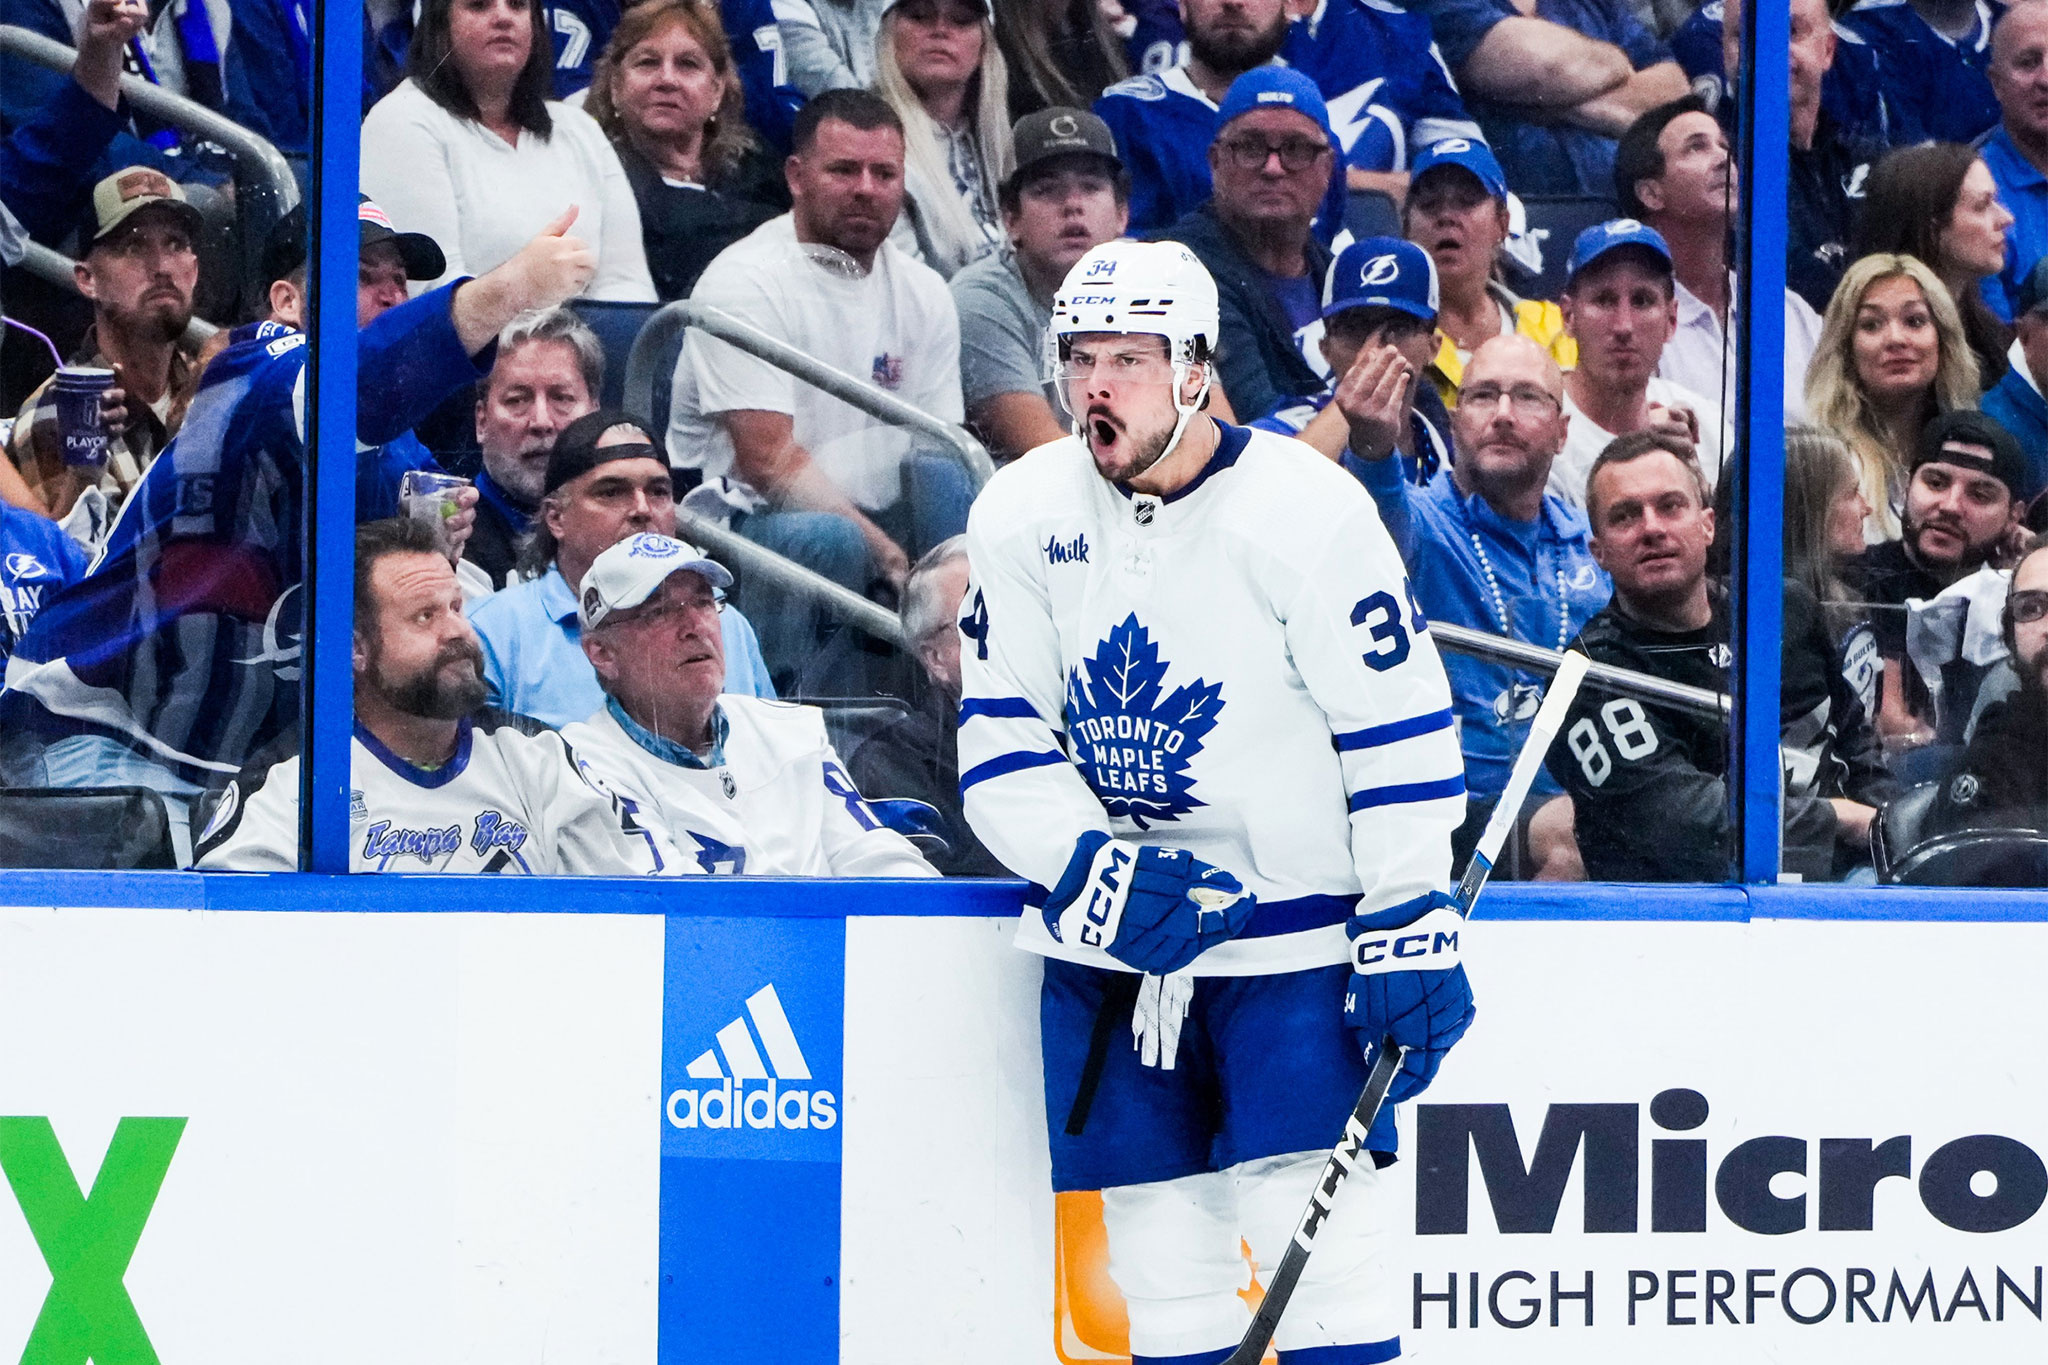 Photo: maple leafs playoff drought